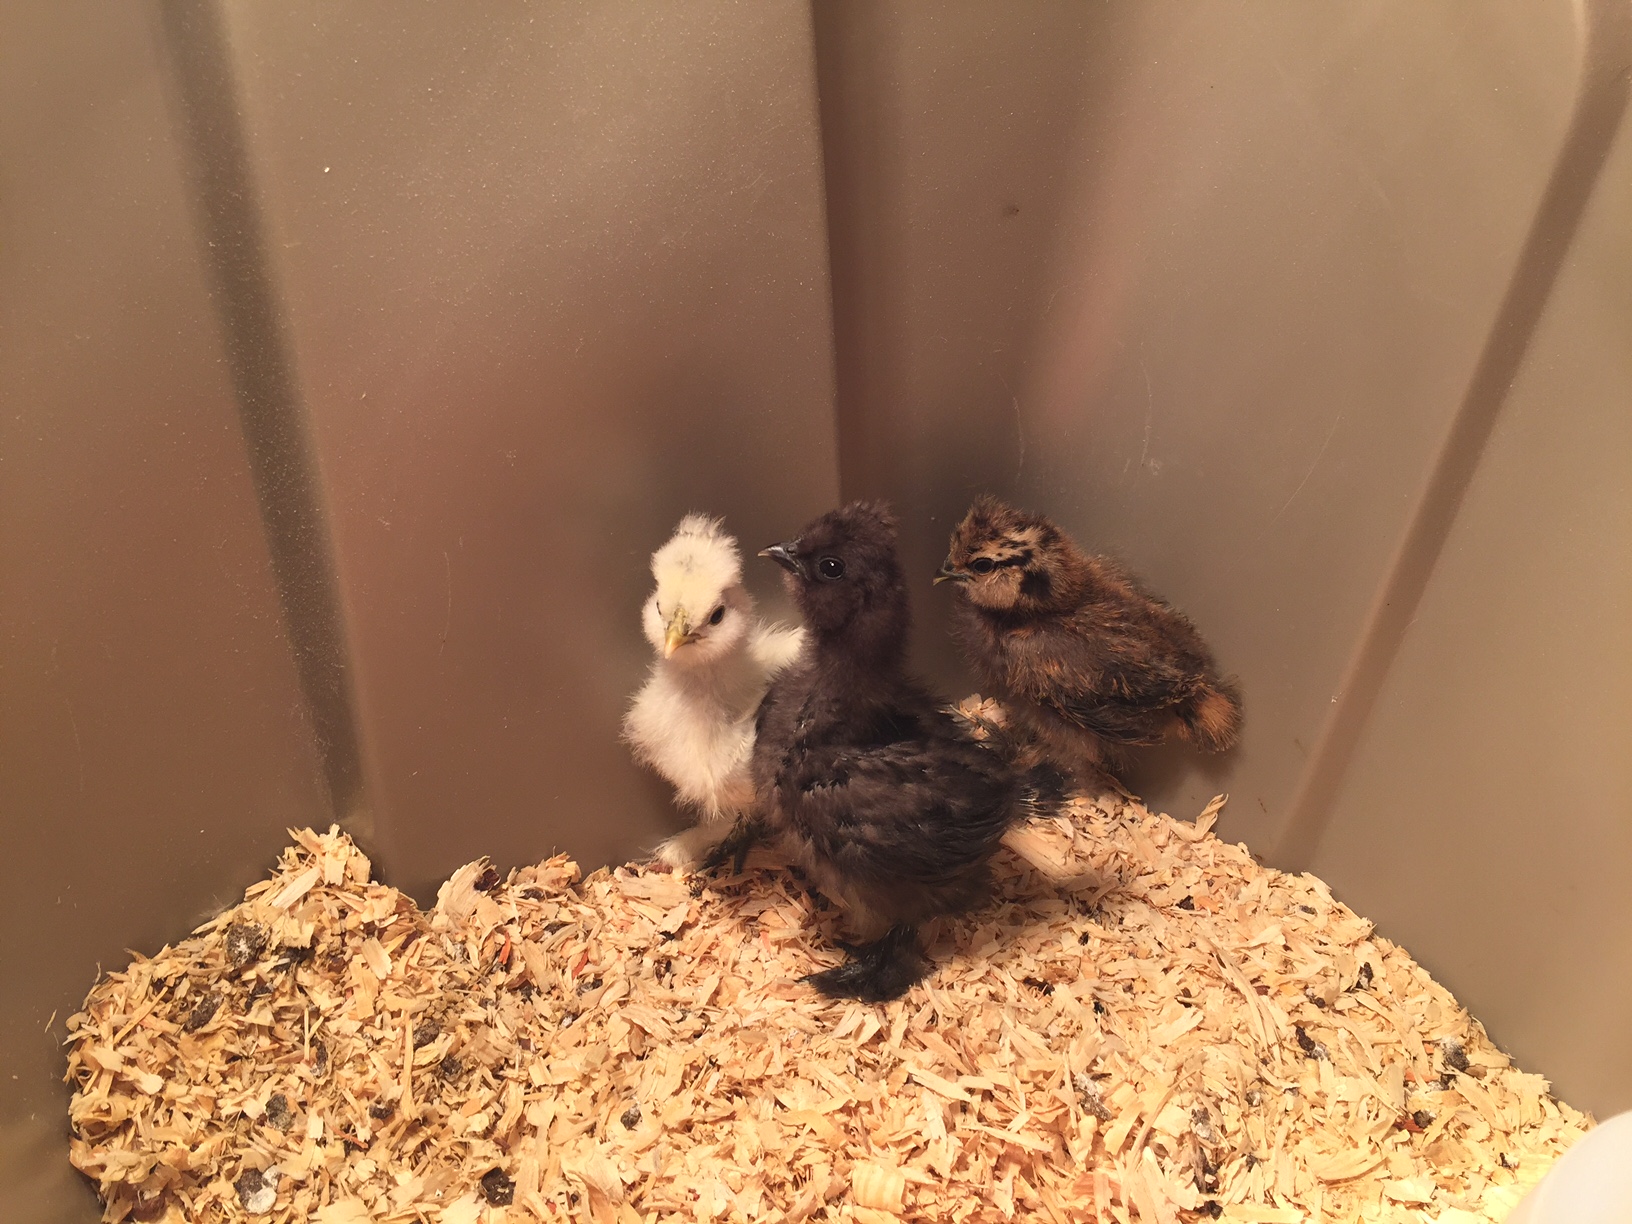 My Silkies at just over two weeks. Star (white), Shooting Star (Black) and KFC (speckled). I got these for my grandsons. They are so cute.